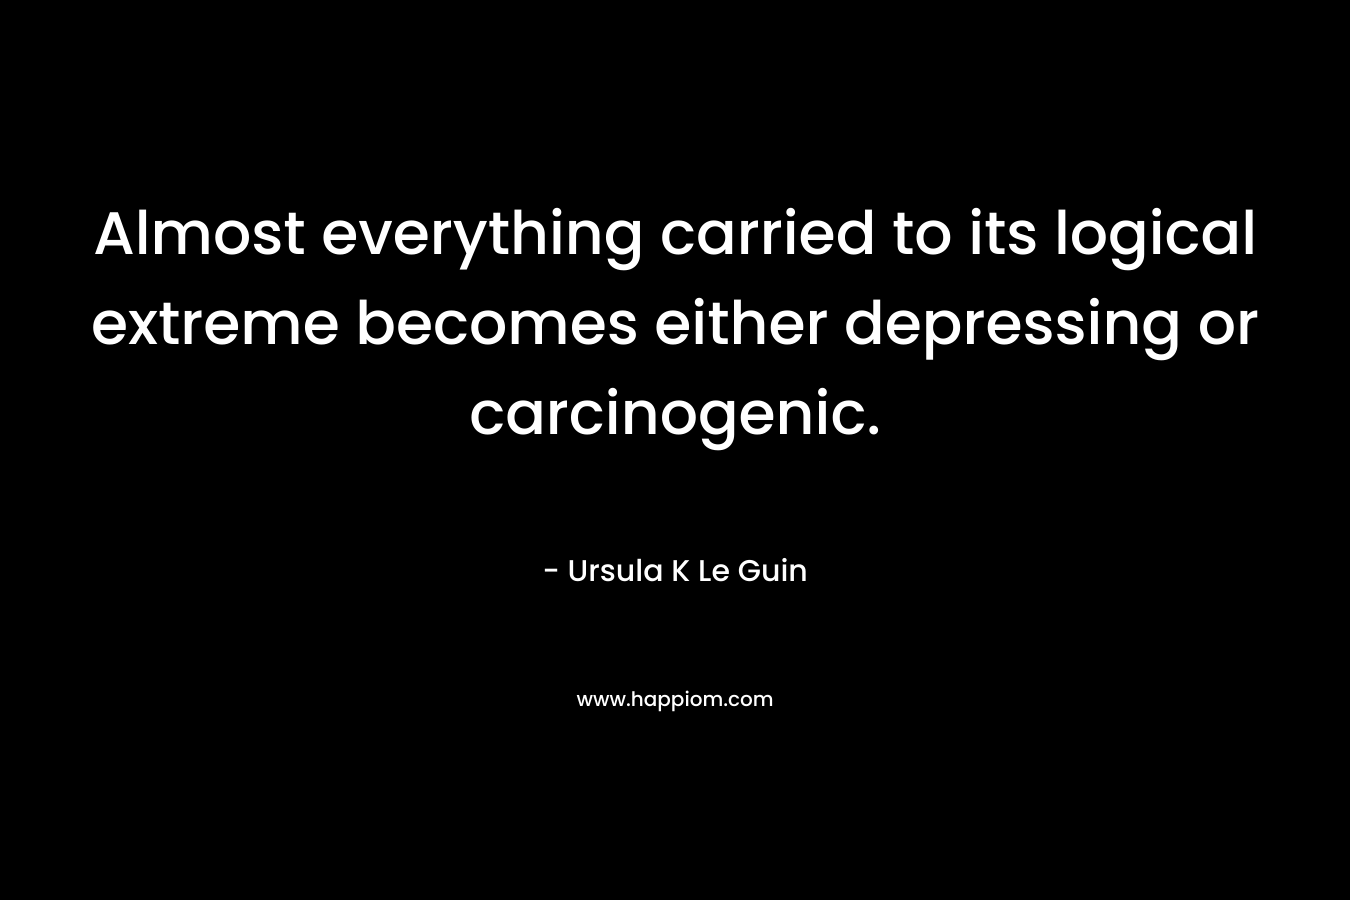 Almost everything carried to its logical extreme becomes either depressing or carcinogenic. – Ursula K Le Guin